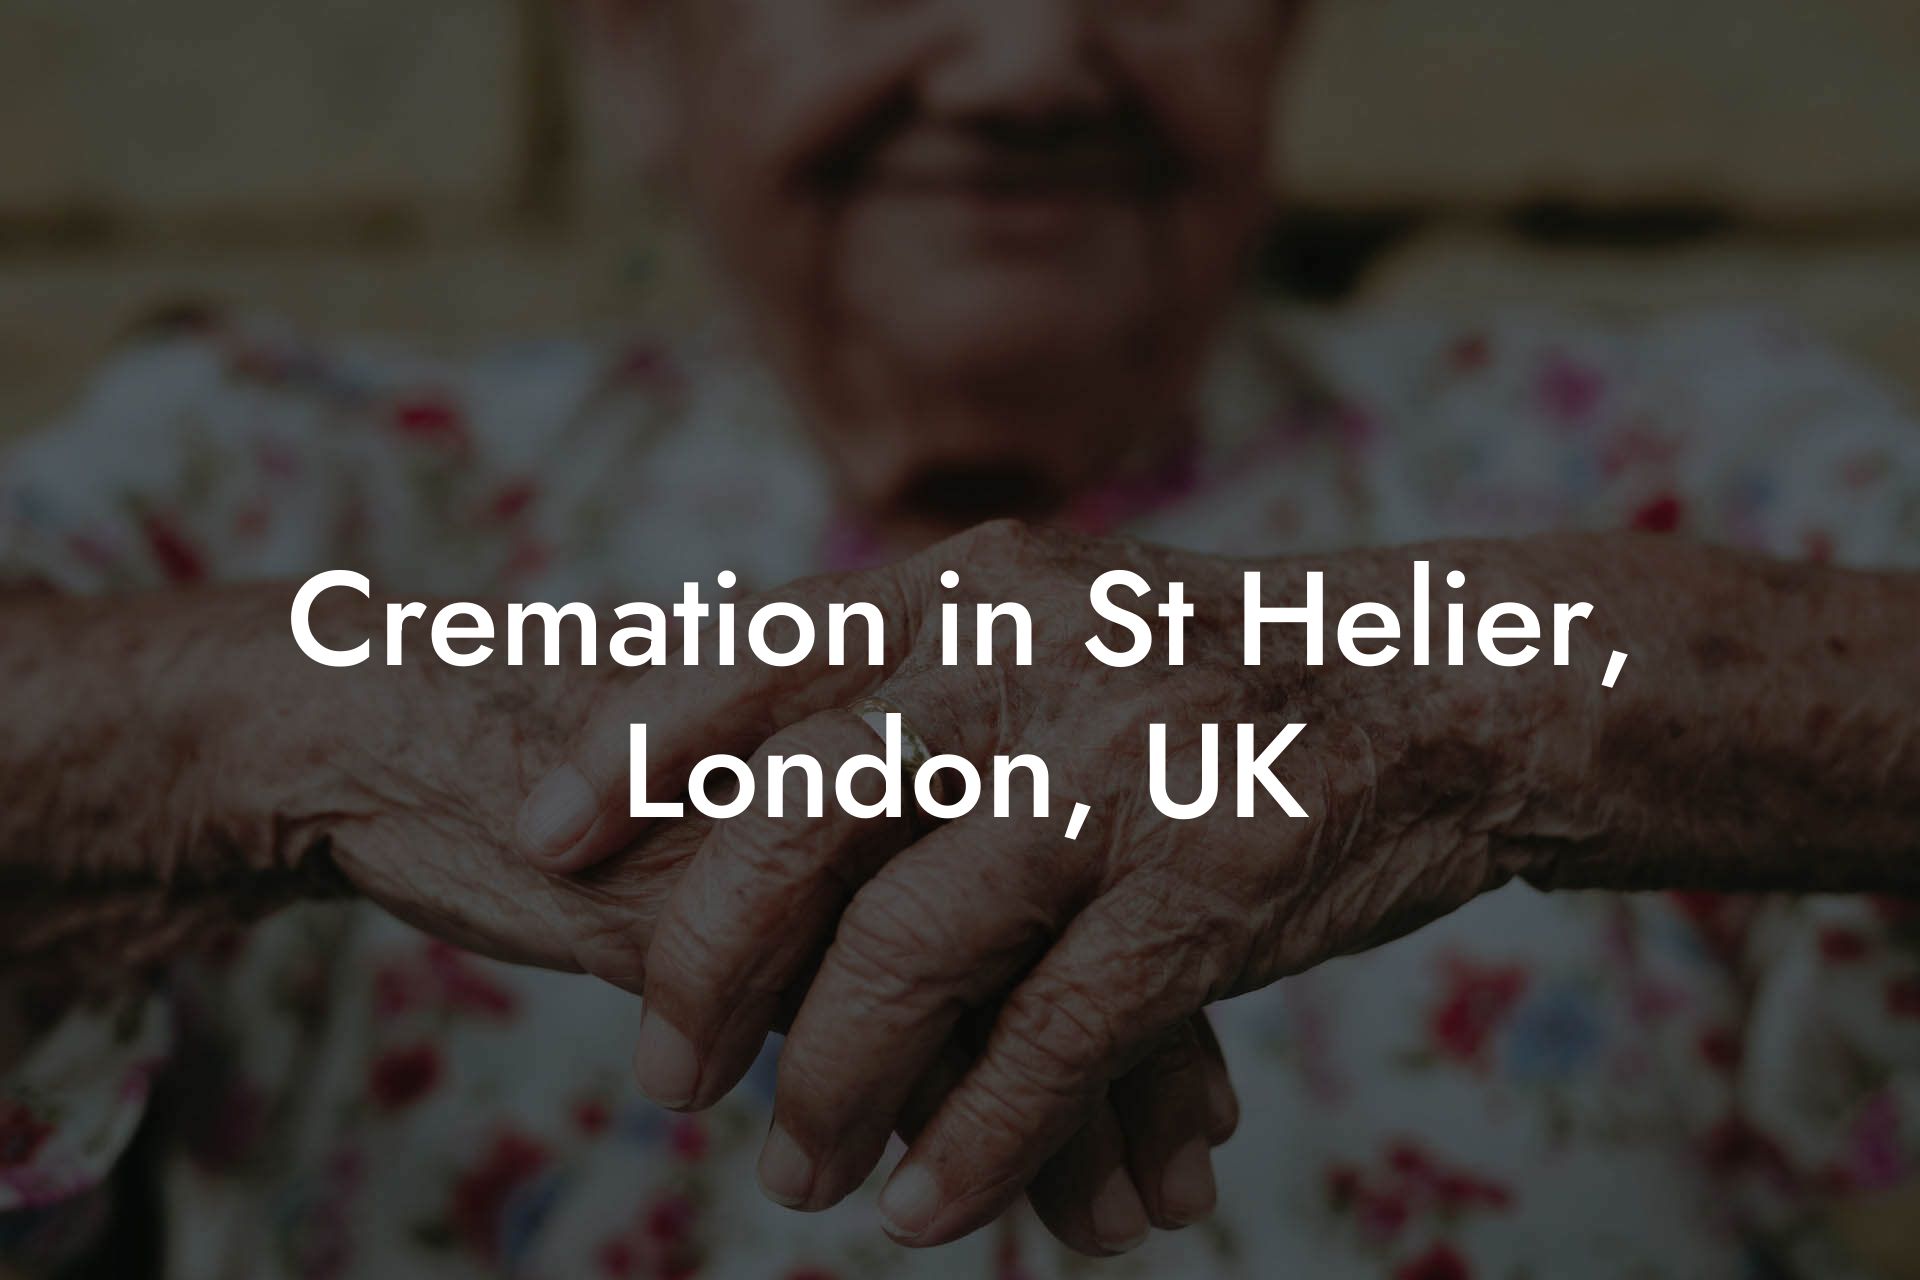 Cremation in St Helier, London, UK